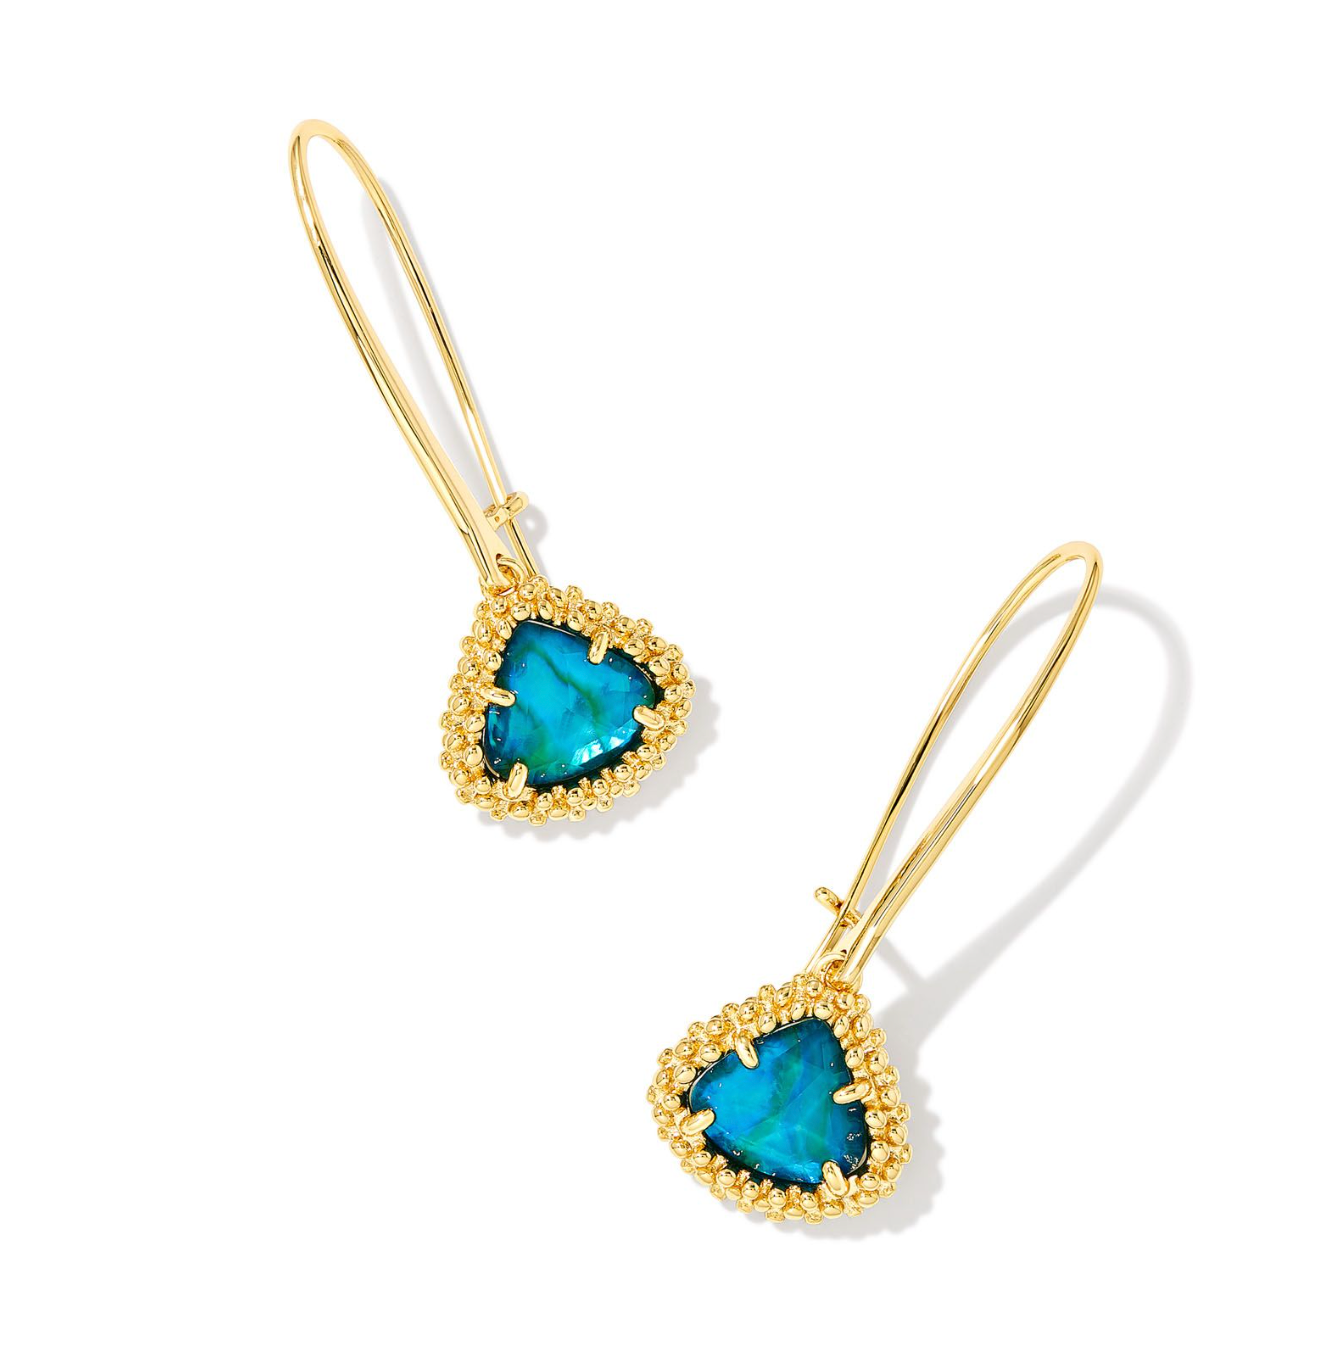 Framed Kendall Gold Wire Drop Earrings in Teal Abalone | KENDRA SCOTT - The Street Boutique 